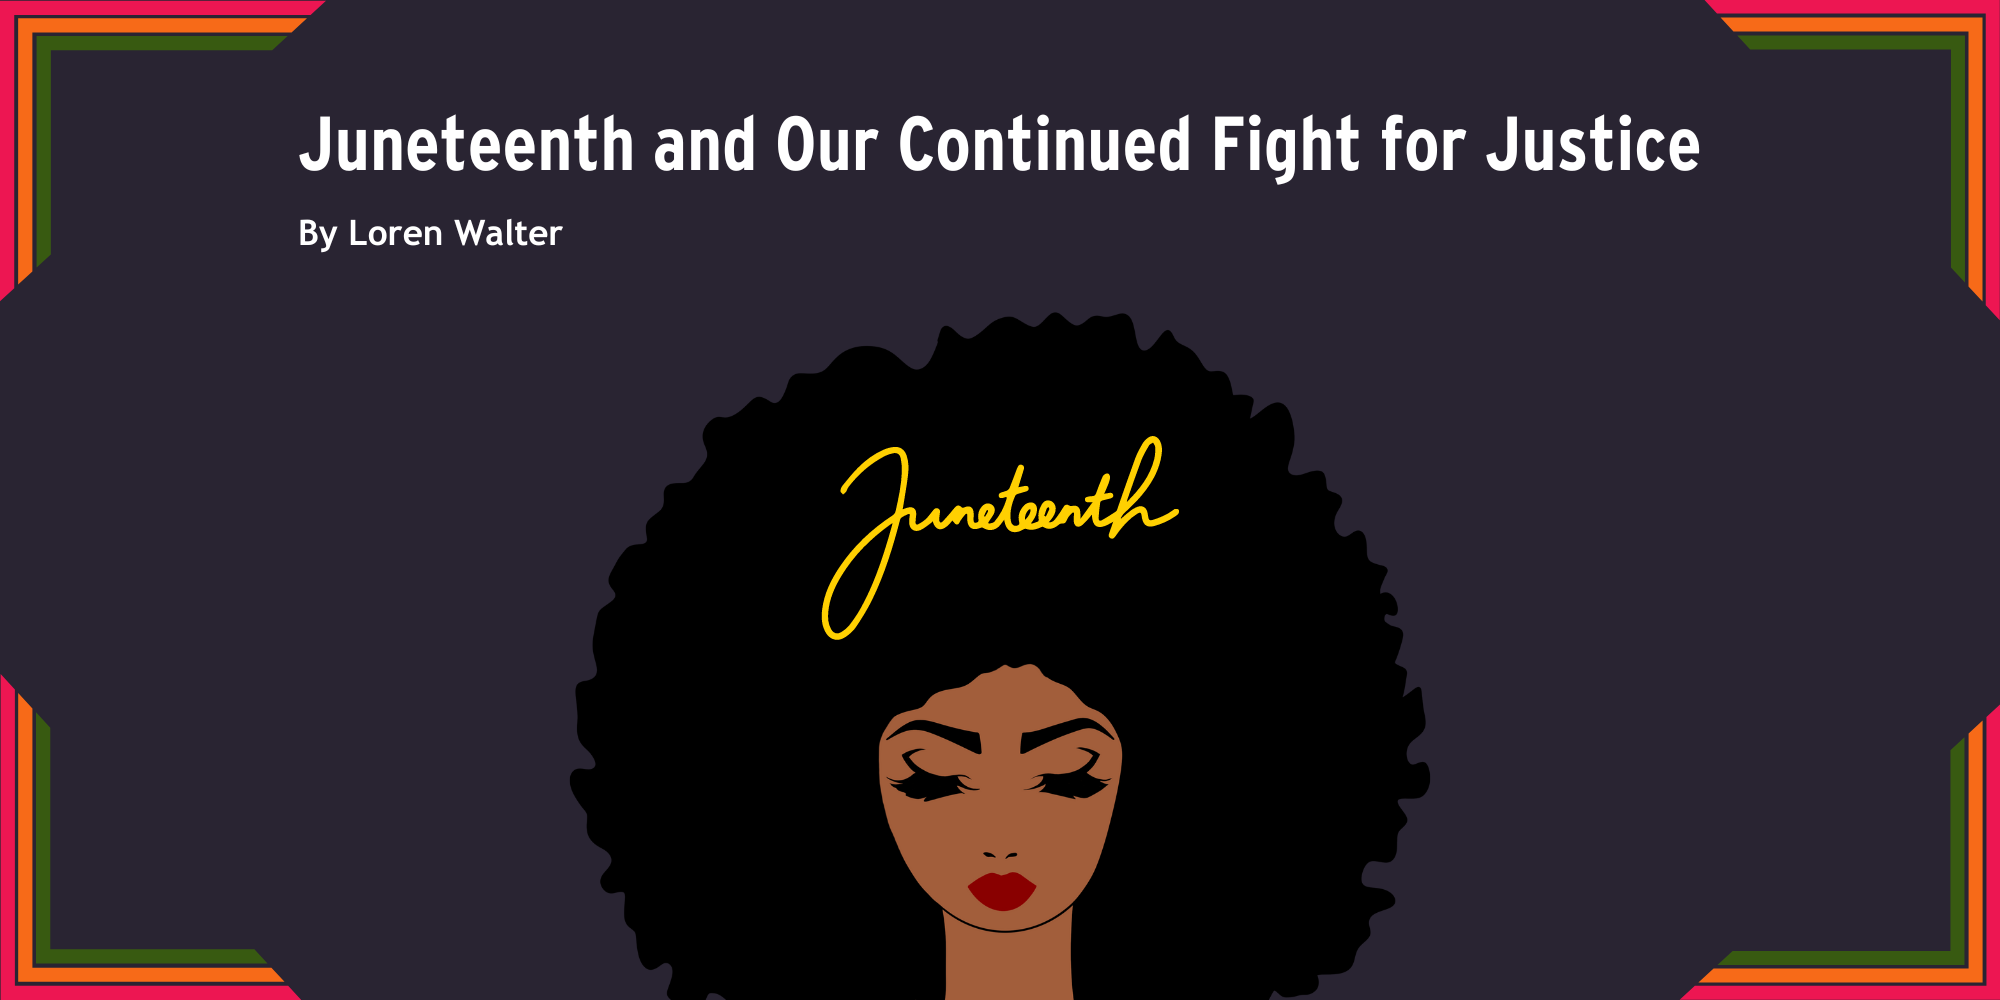 Juneteenth and Our Continued Fight for Justice